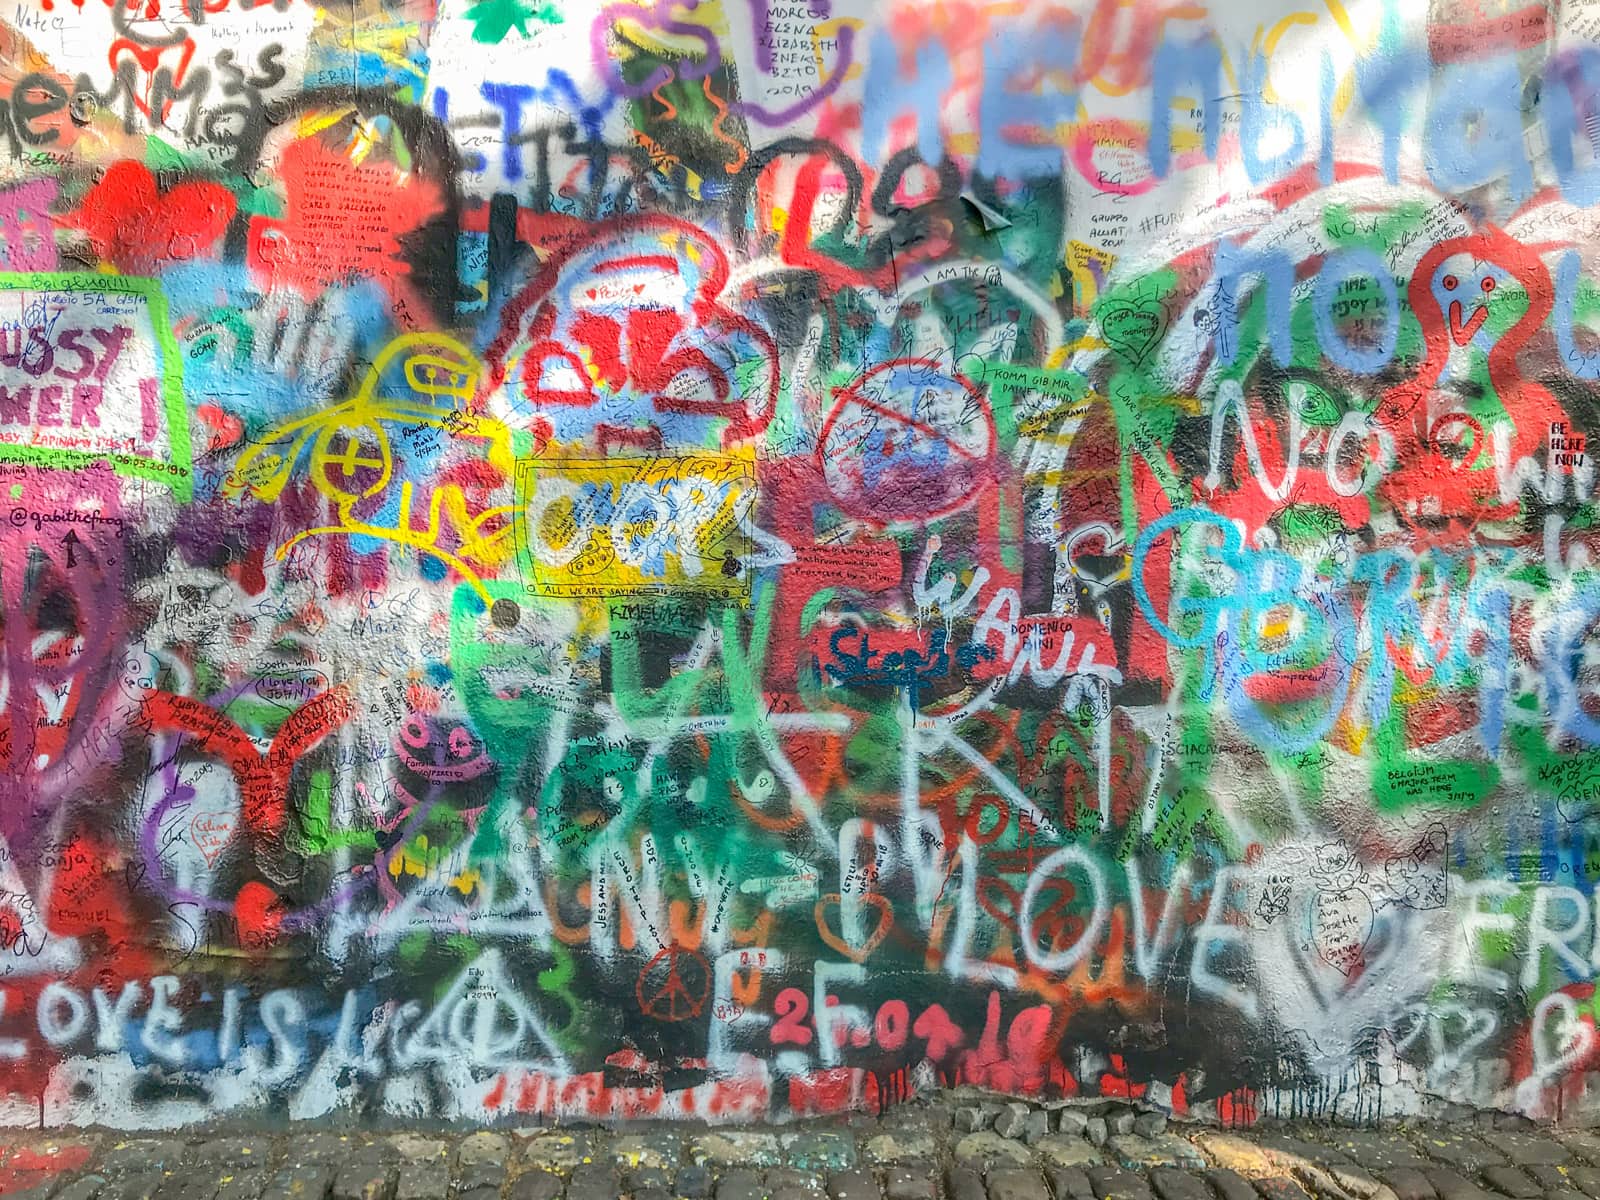 A wall covered in colourful graffiti